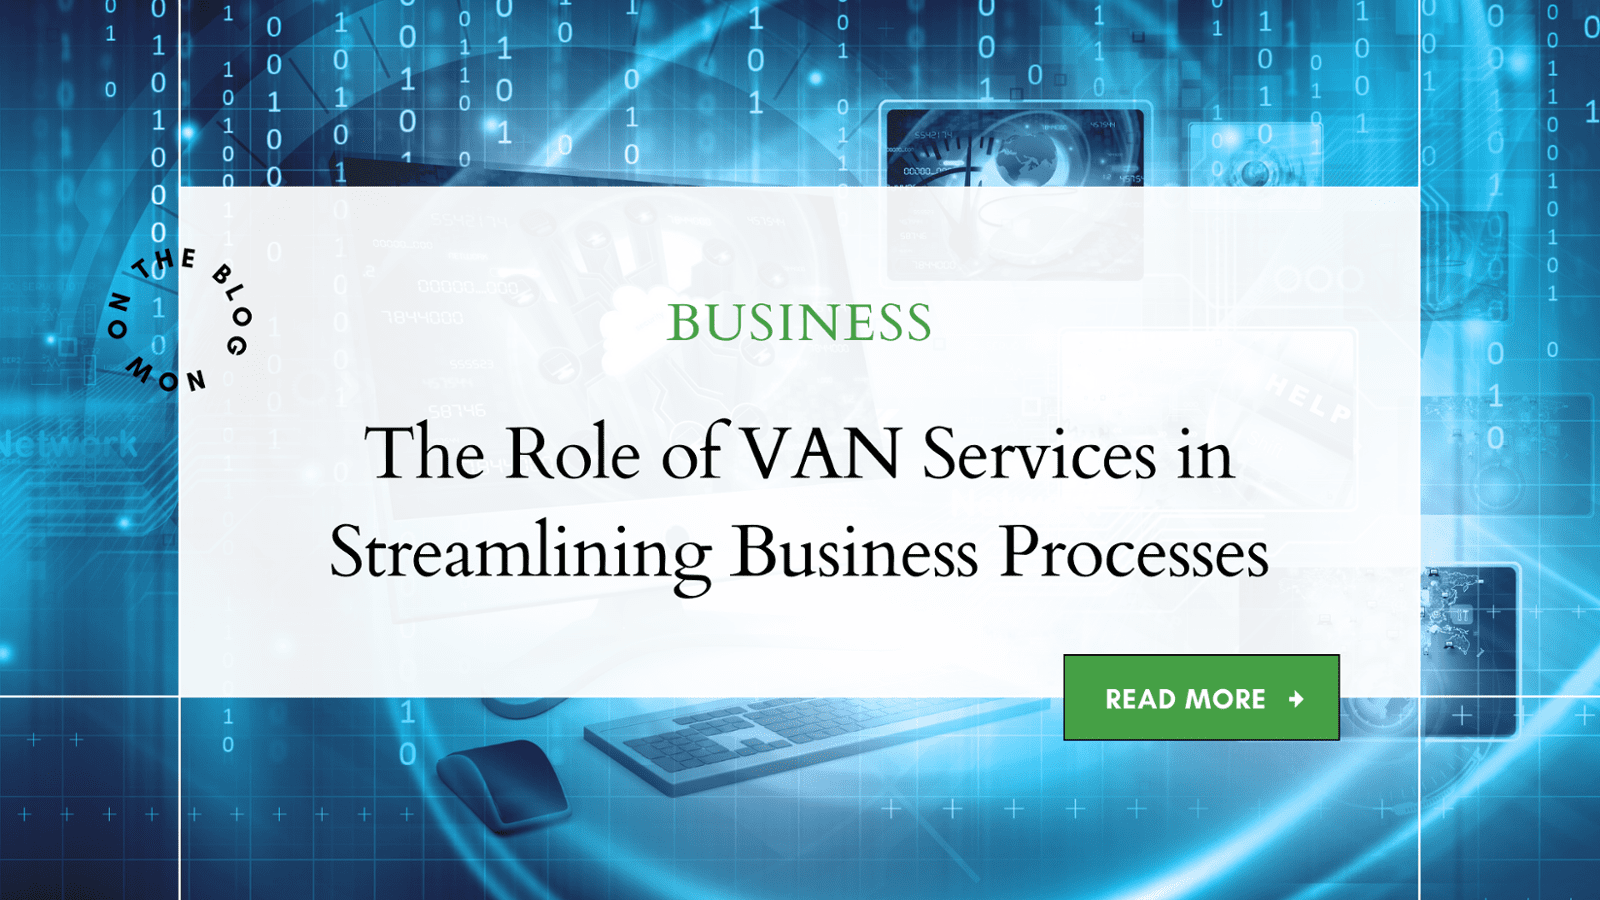 The Role of Value-Added Network Services in Streamlining Business Processes